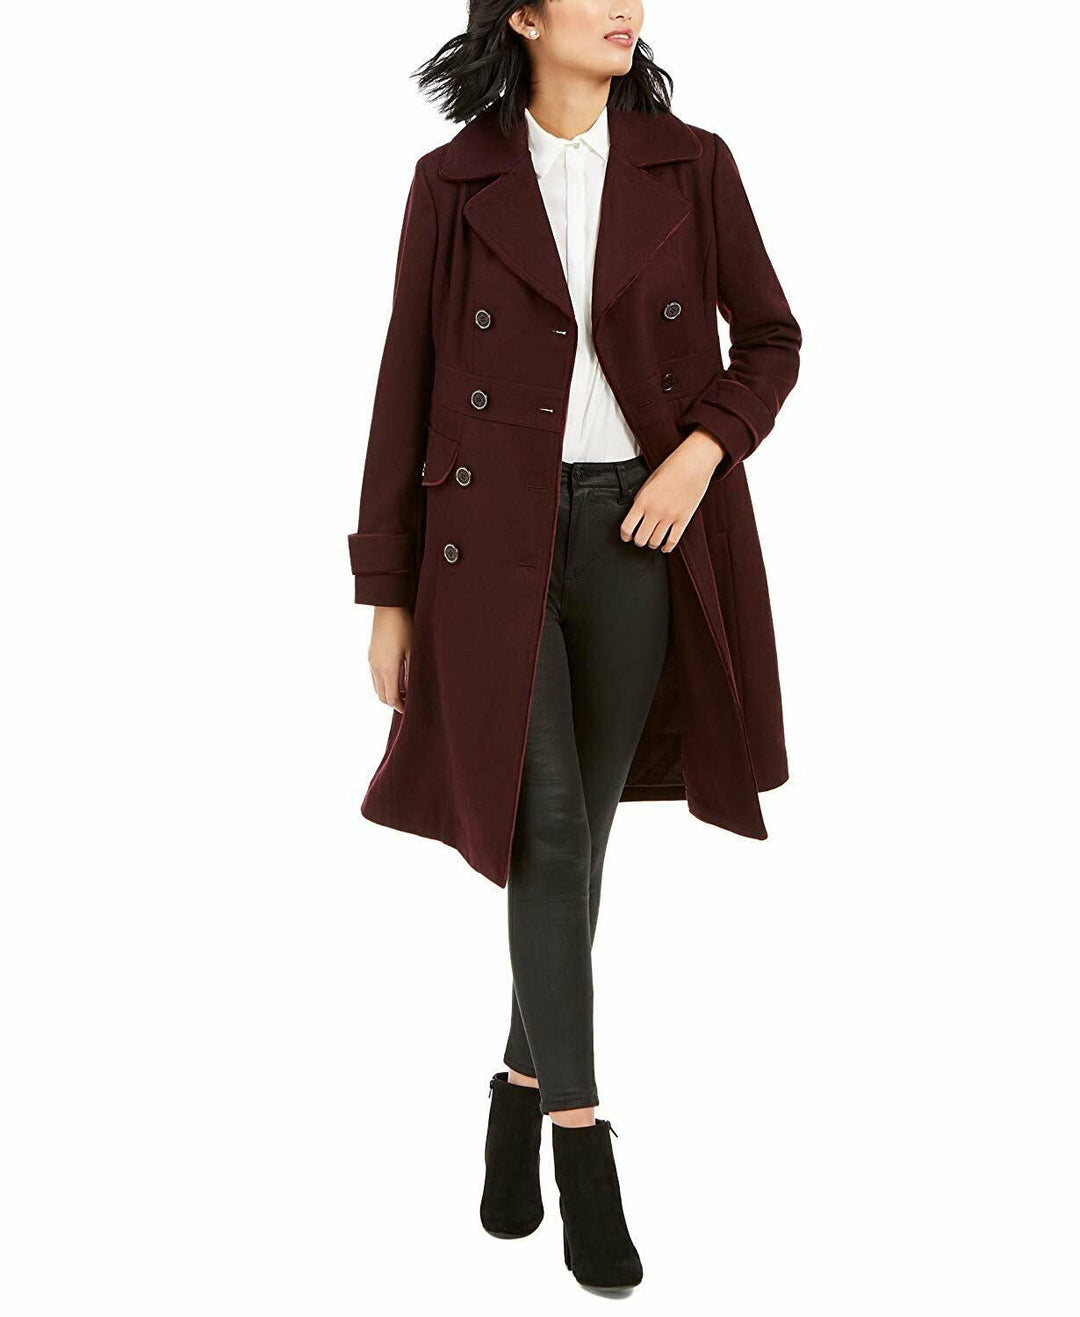 Kenneth Cole New York Womens Double-Breasted Contrast-Piping Peacoat